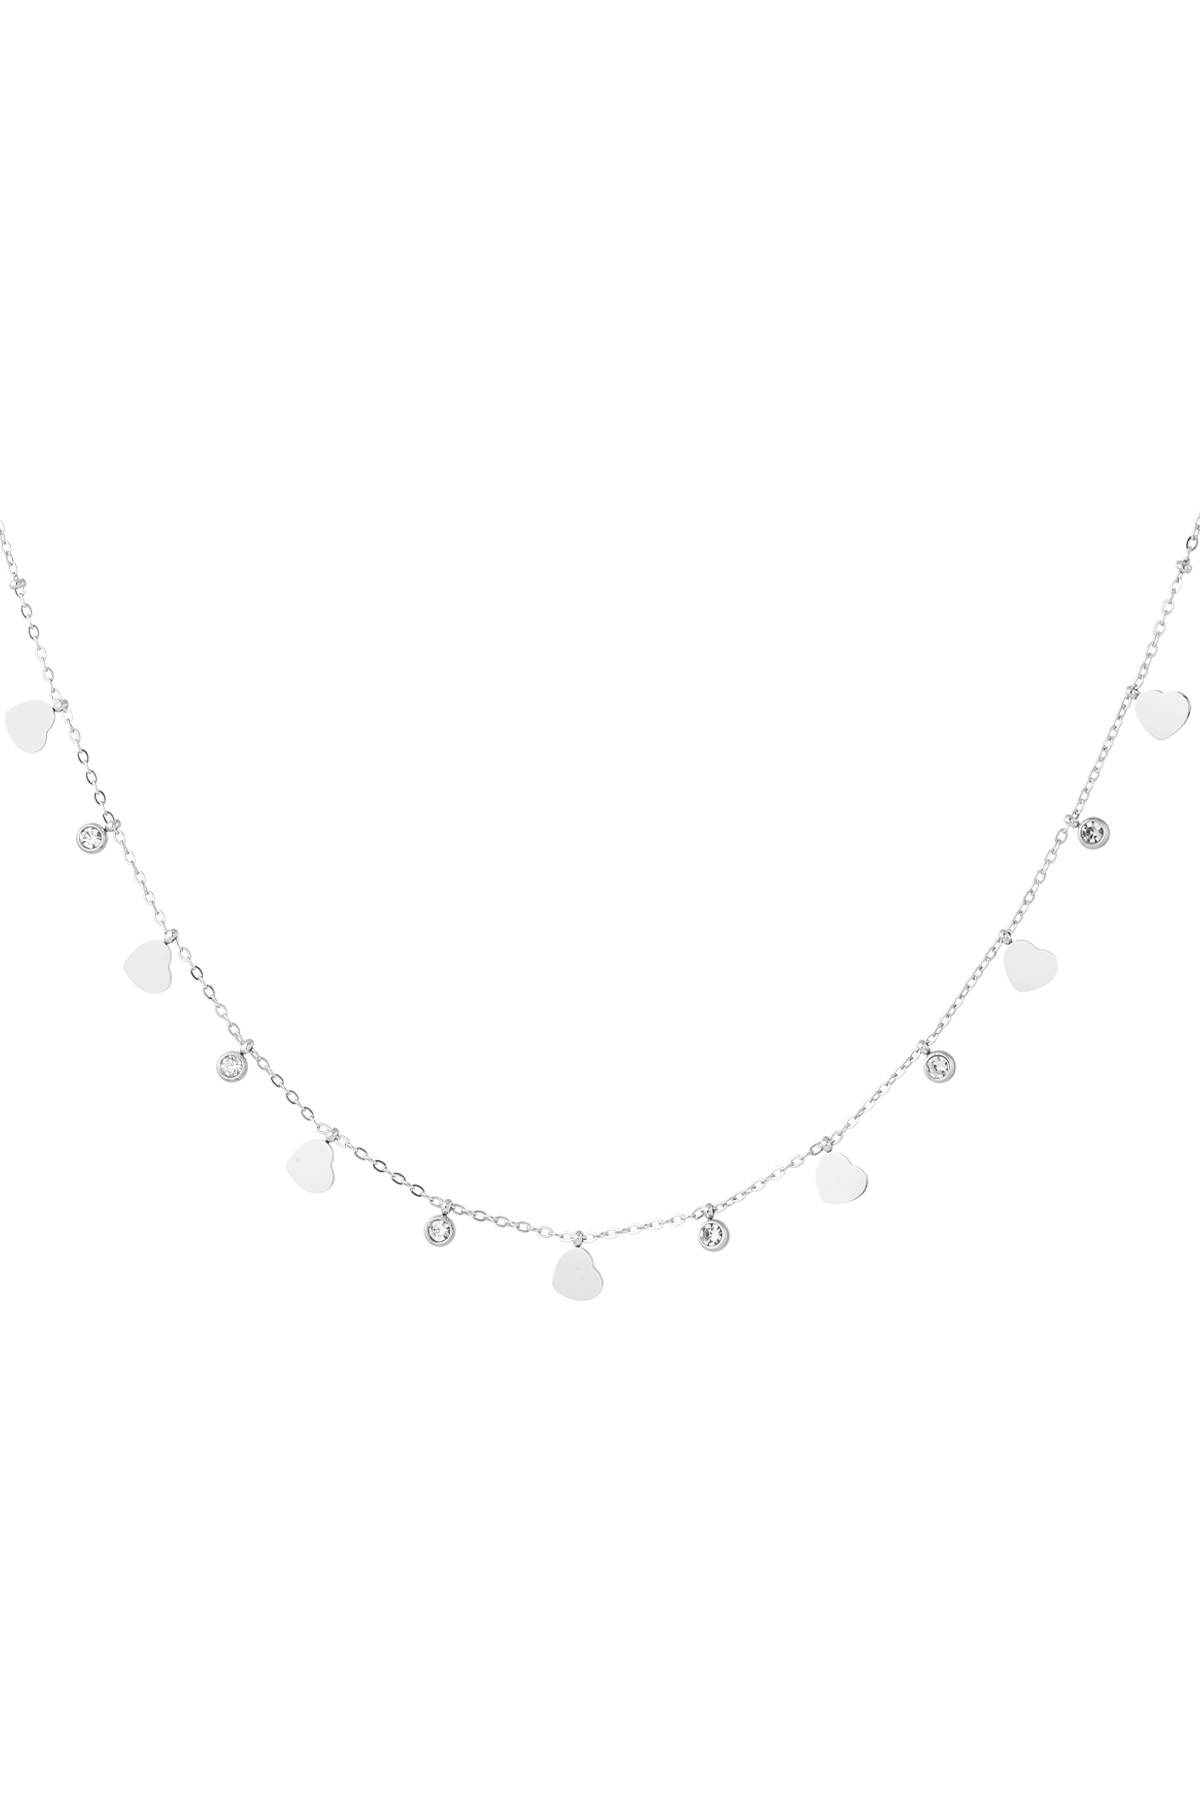 Charm necklace with hearts and diamonds - silver h5 